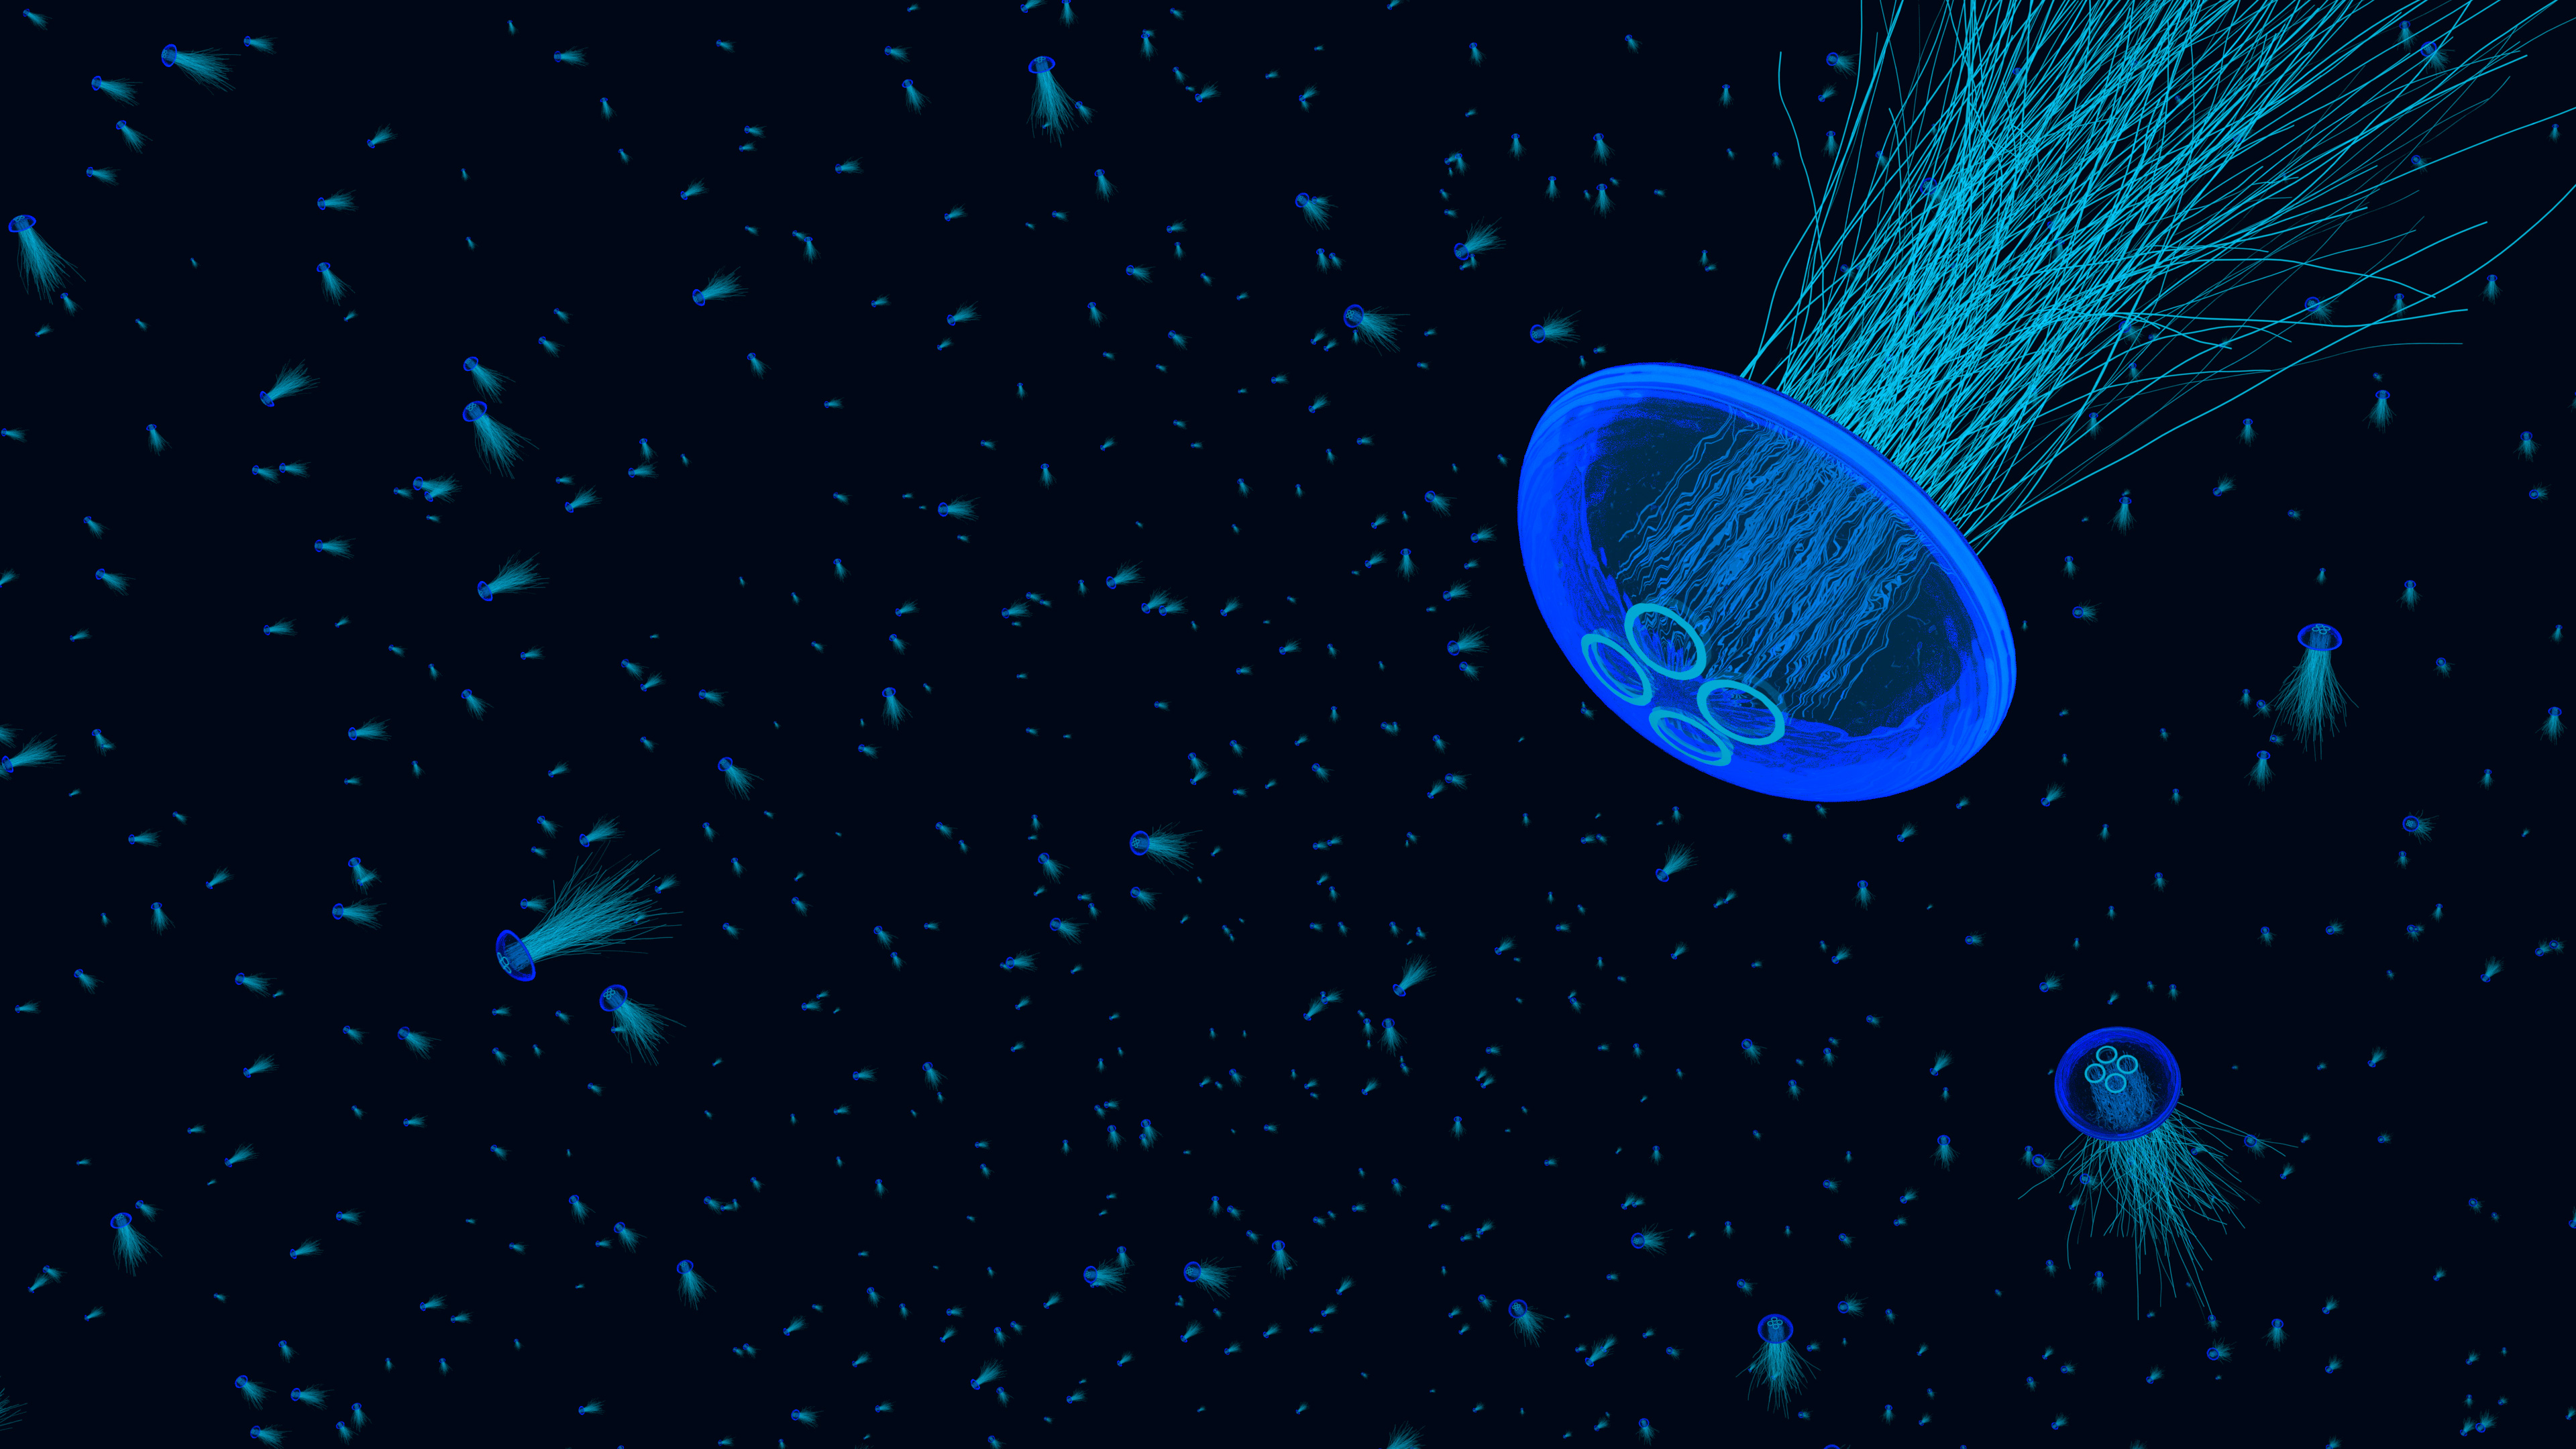 Blue Jellyfish in Water During Daytime. Wallpaper in 3840x2160 Resolution